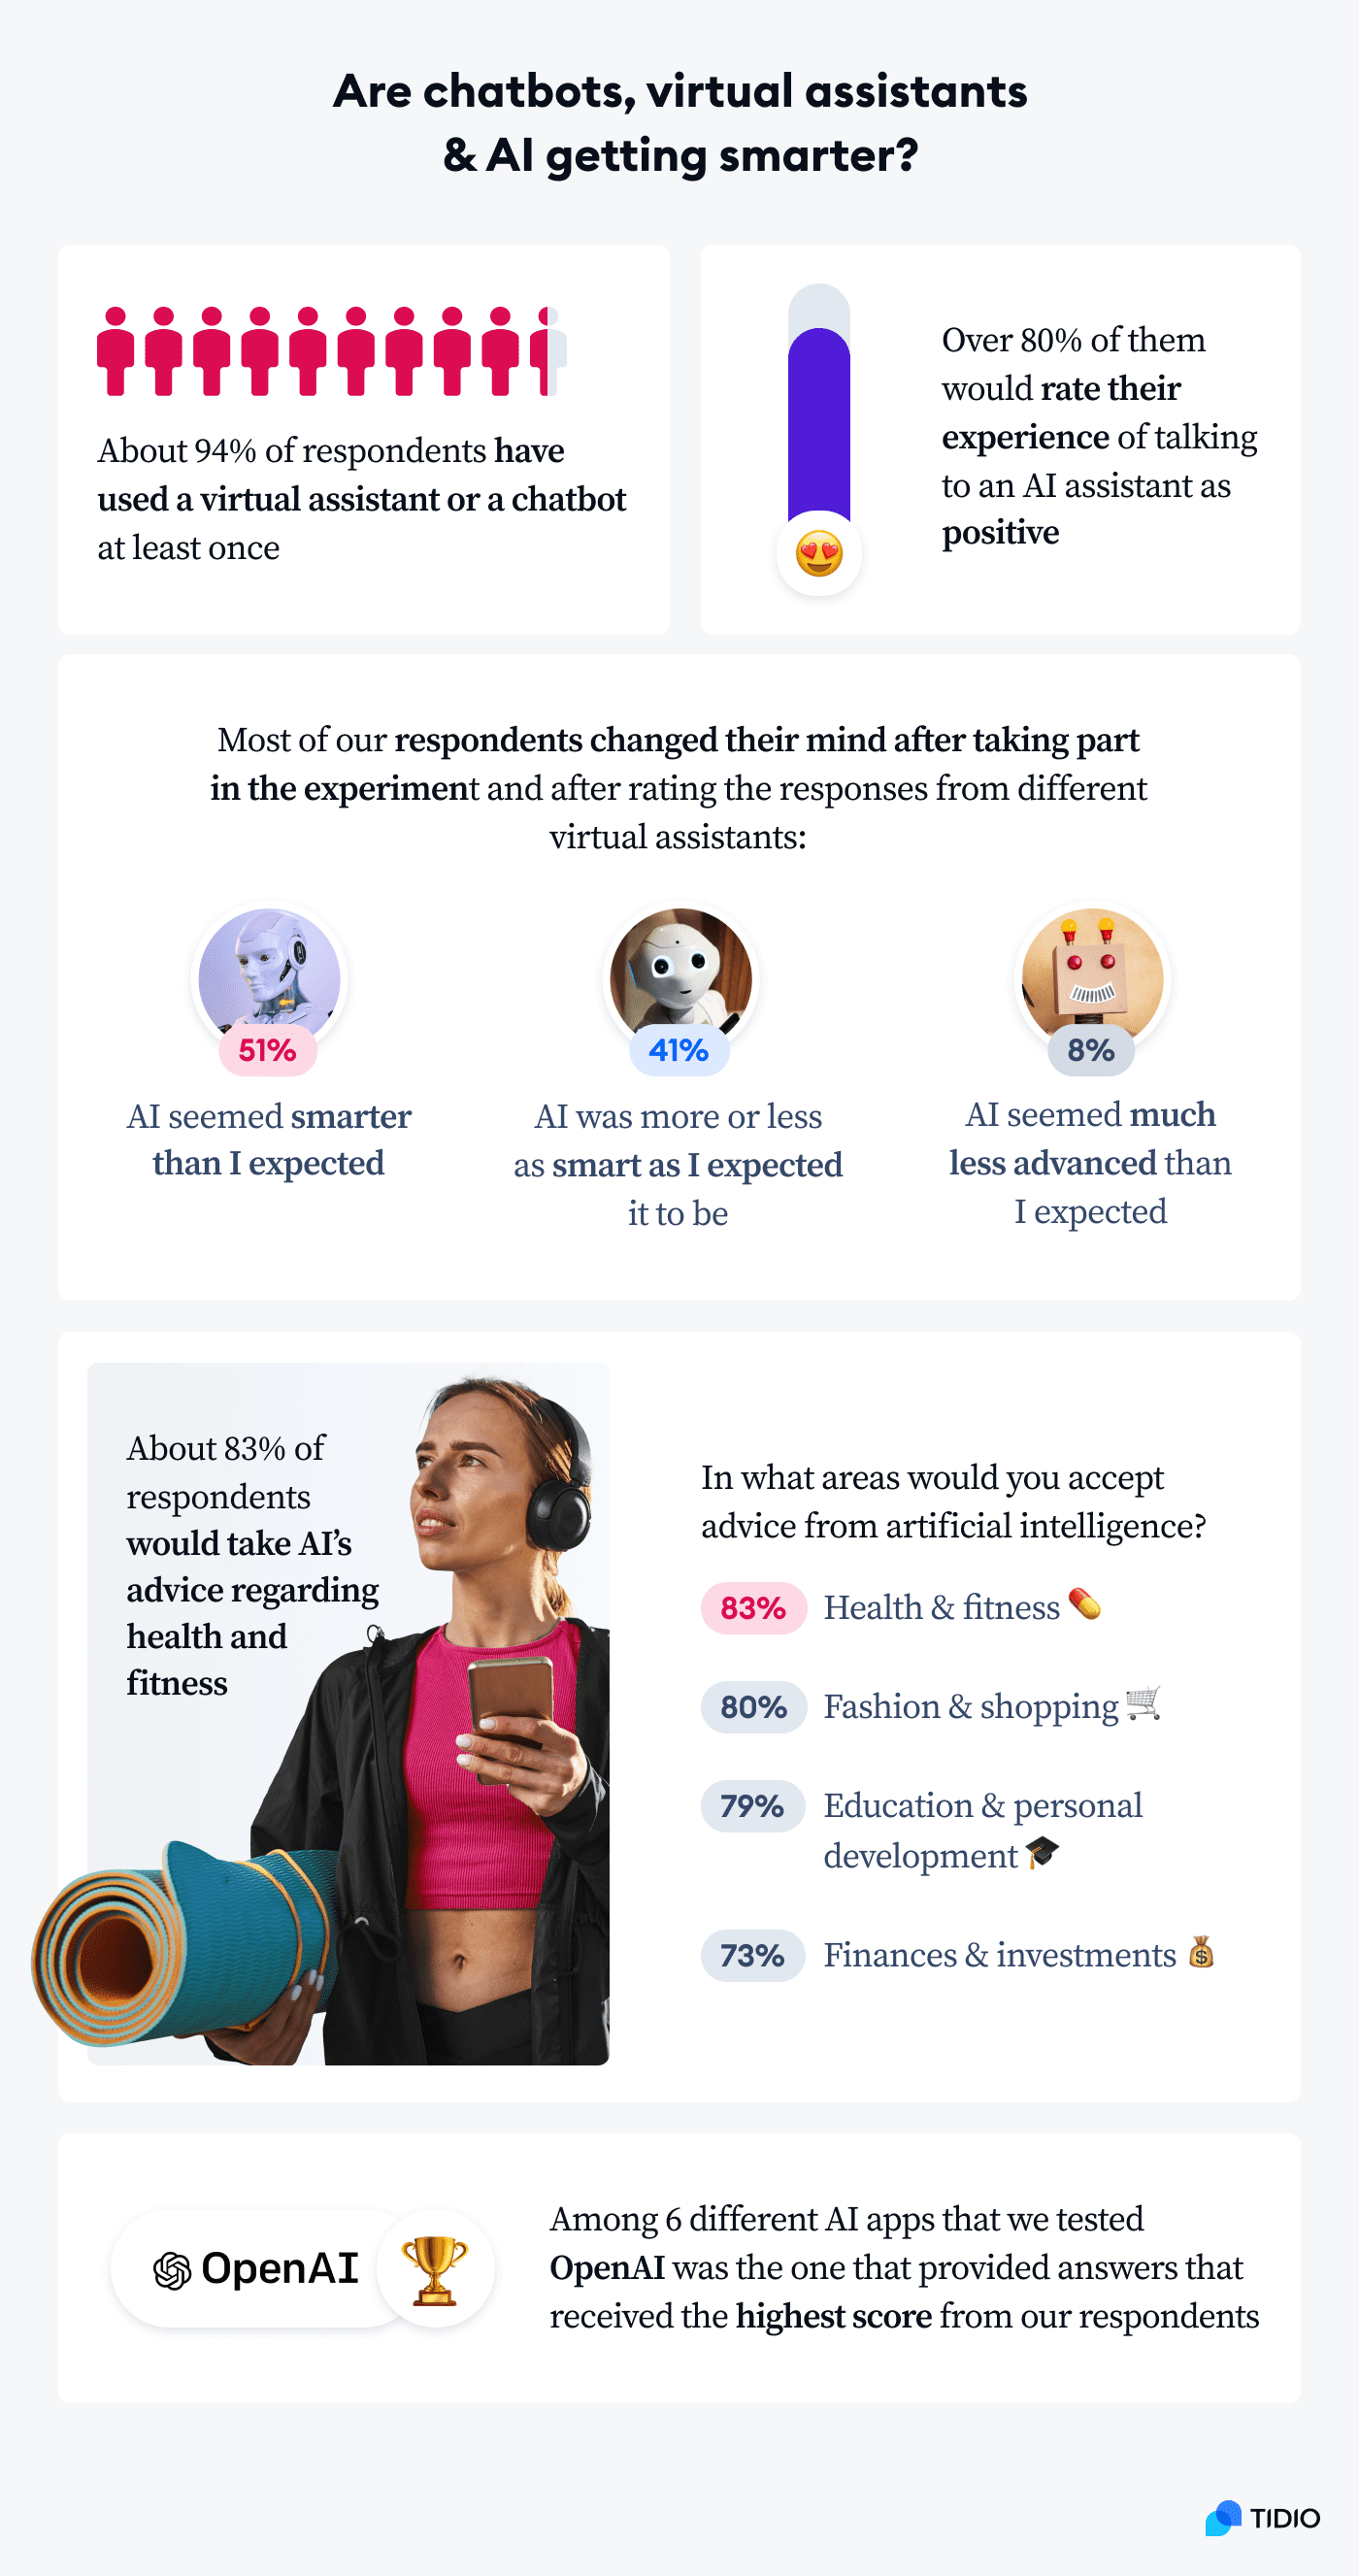 Statistics showing the outlook on chatbots and how smart they are.